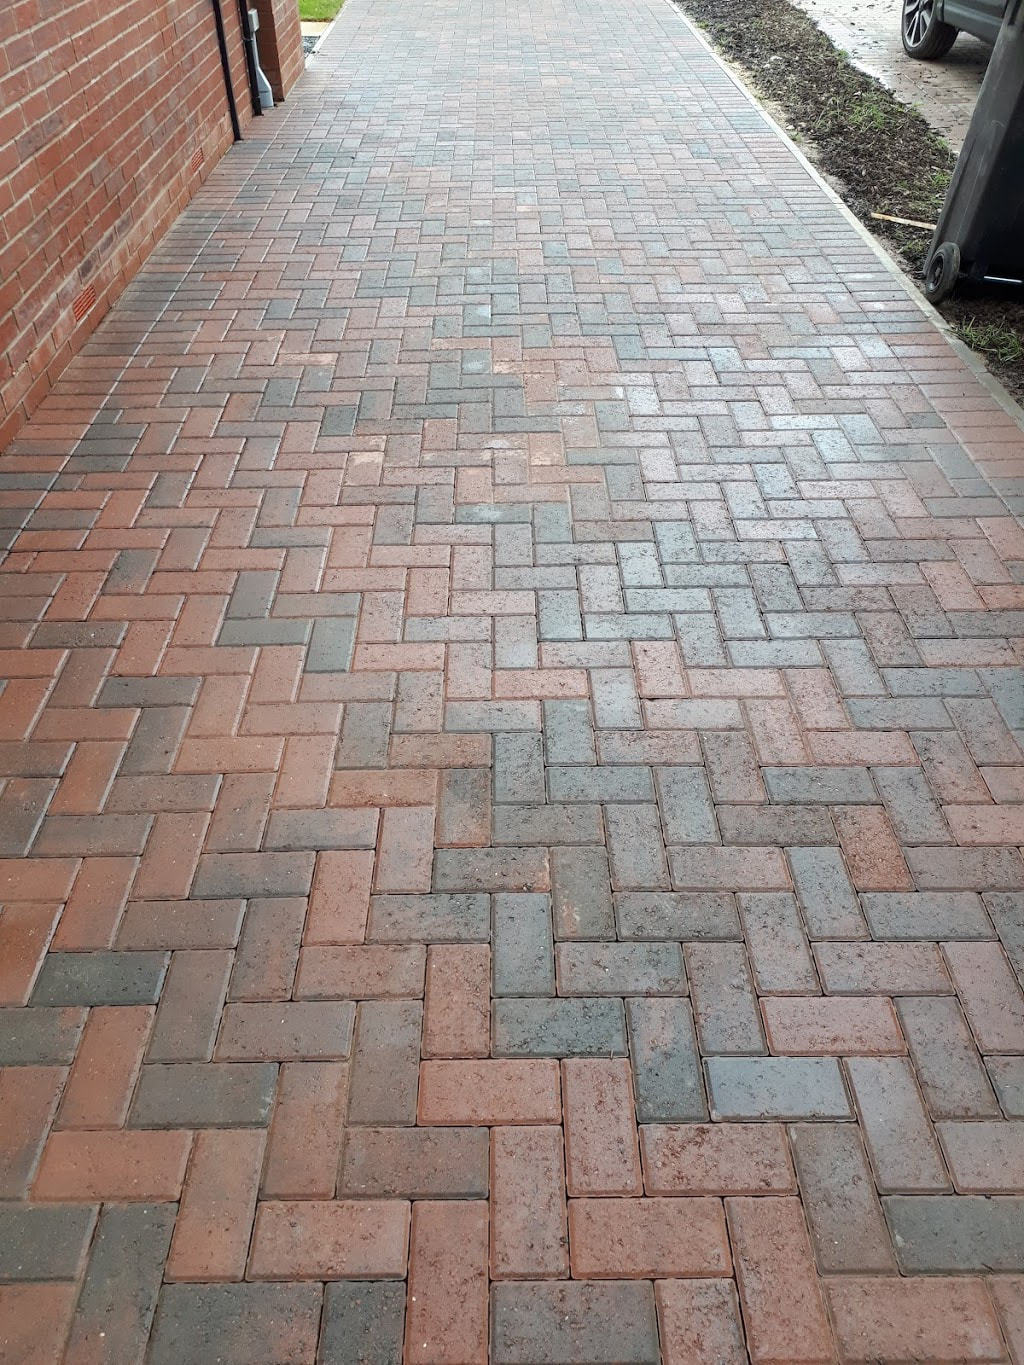 Driveway after professional cleaned and treated